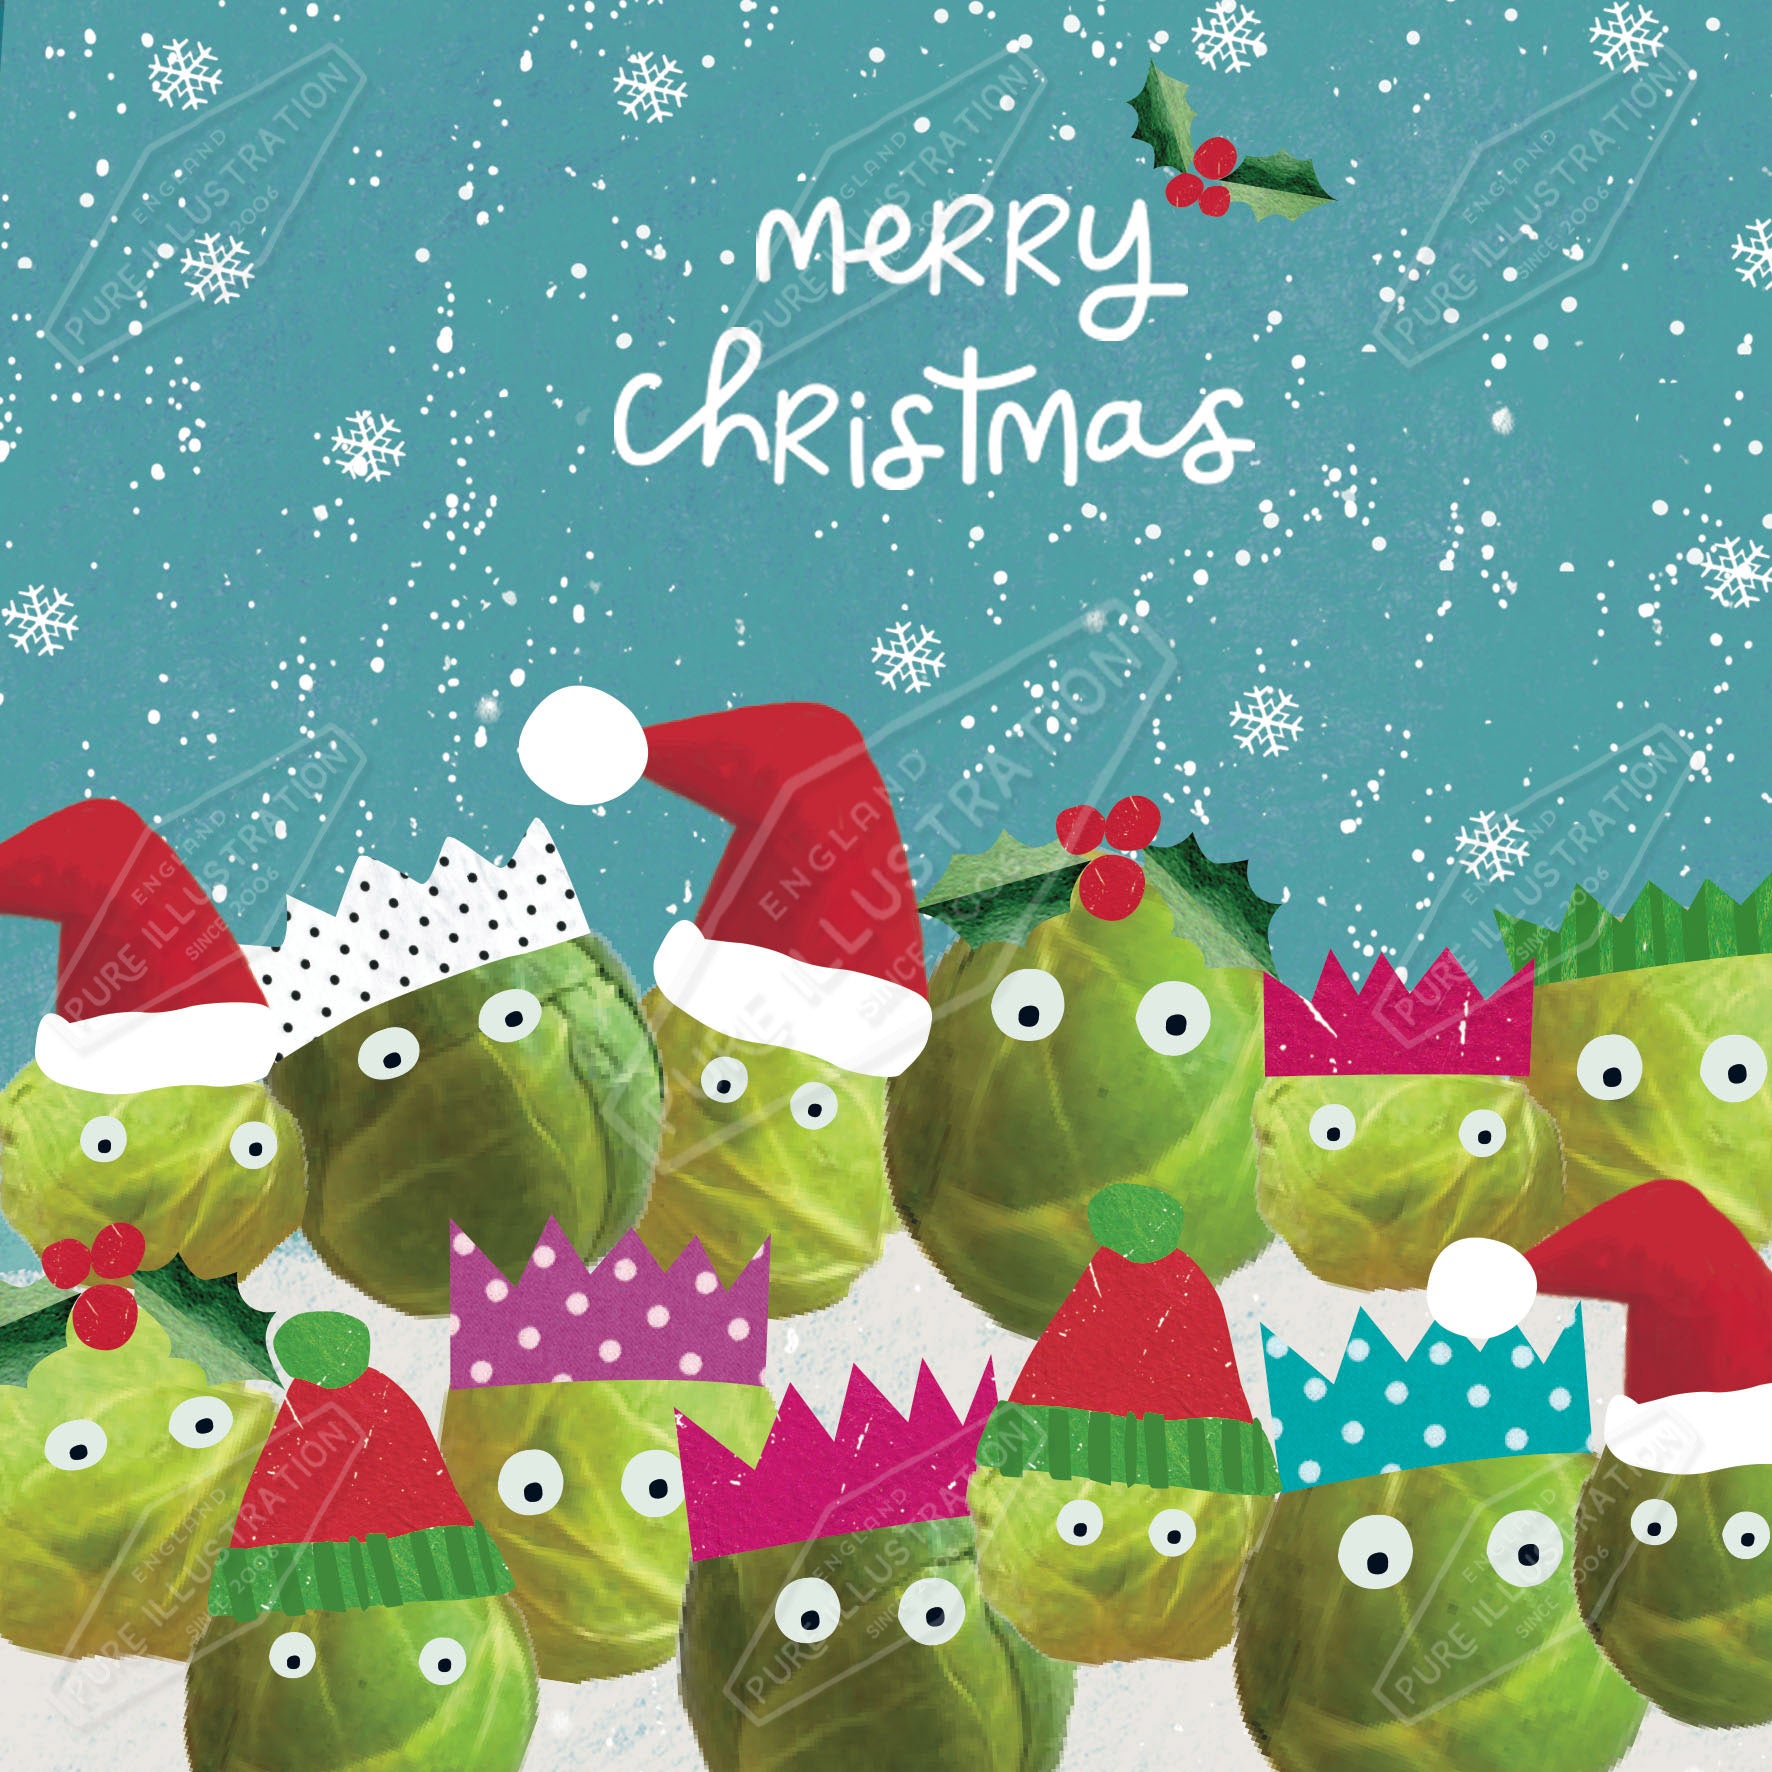 00035028IMC - Christmas Peas Design by Isla McDonald for Pure Art Licensing Agency International Product & Packaging Surface Design 